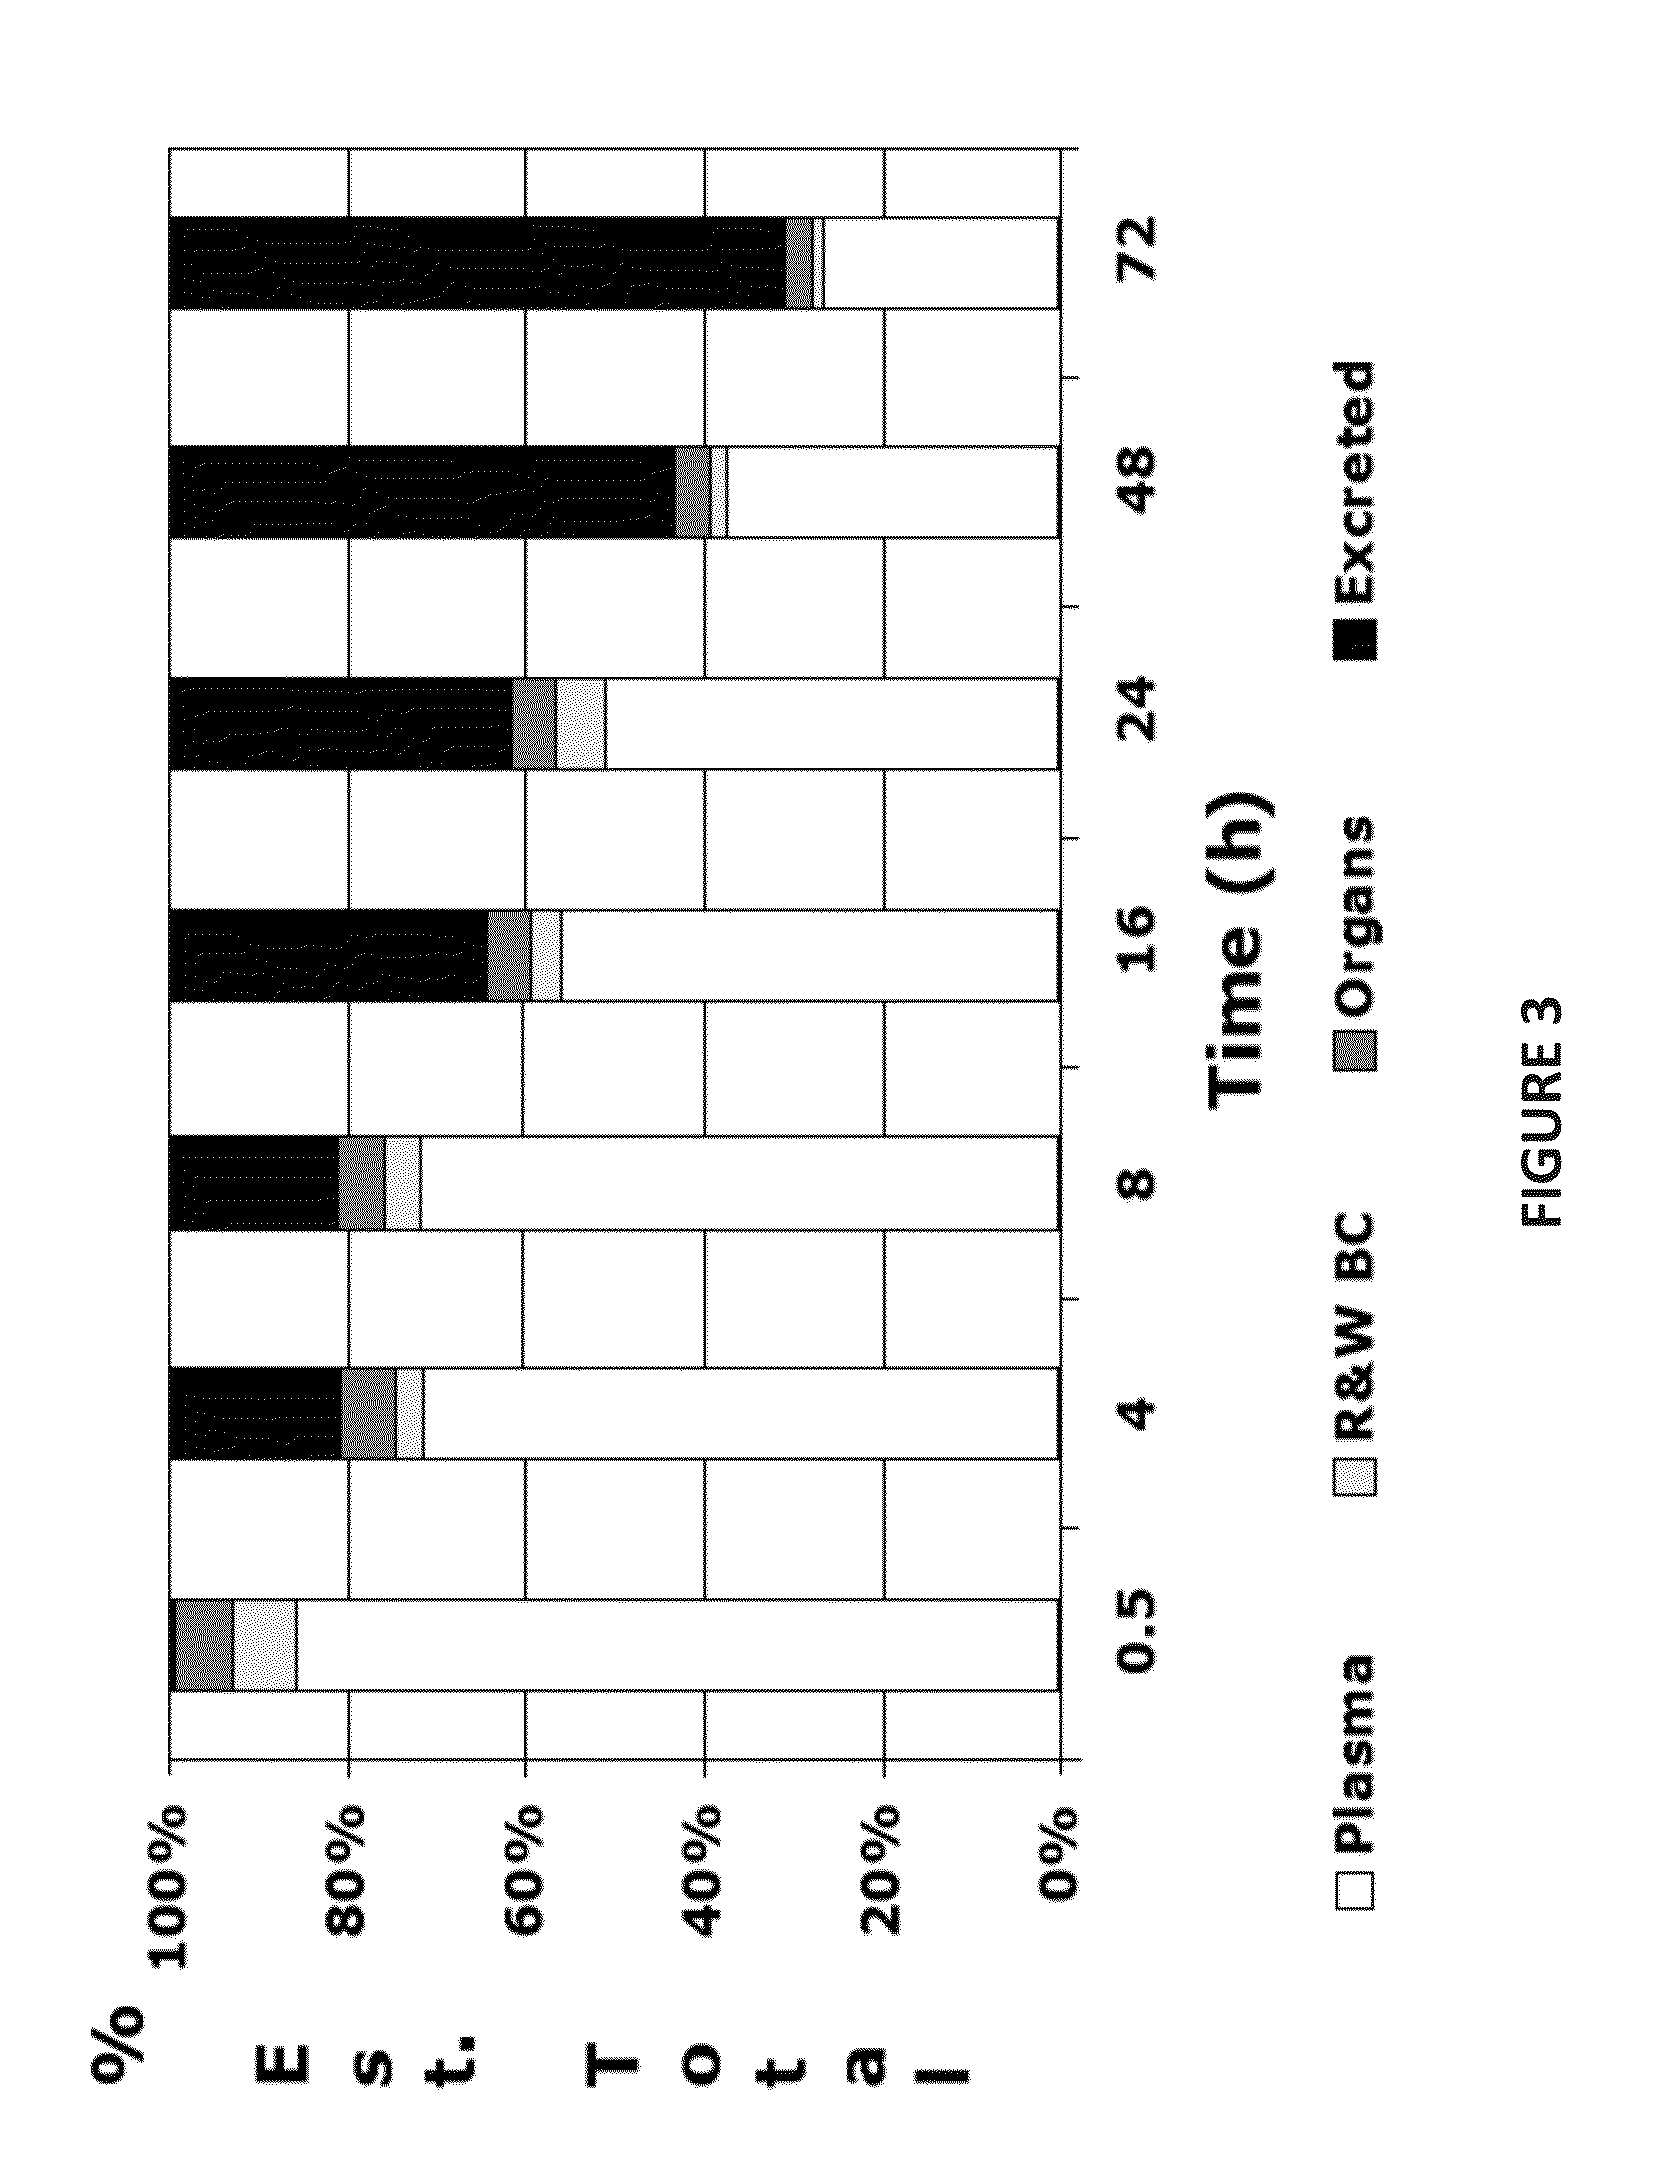 Heparosan/Therapeutic Prodrug Complexes and Methods of Making and Using Same